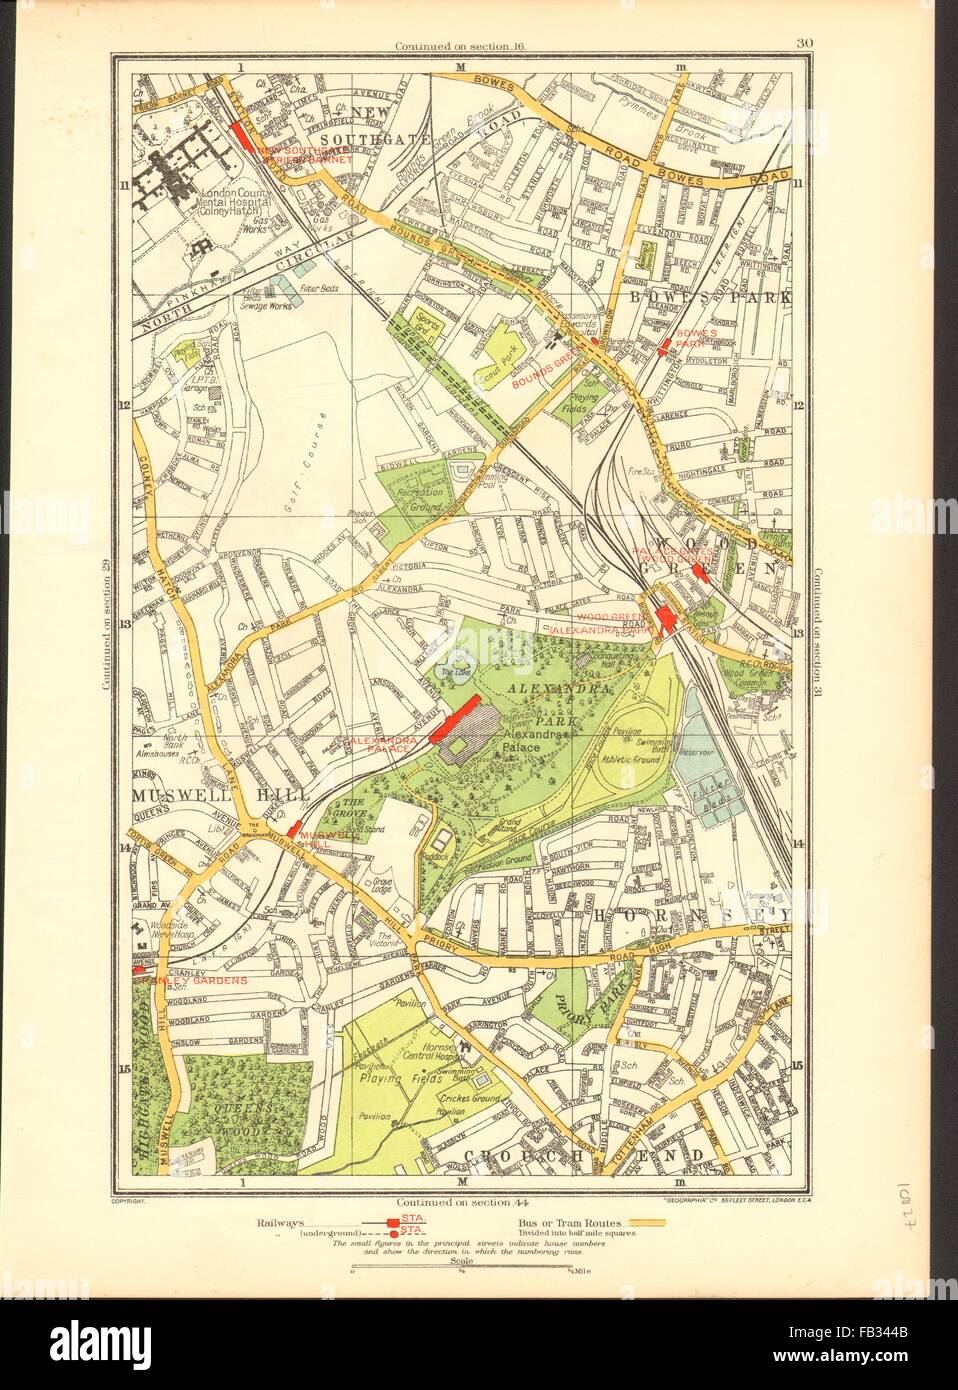 MUSWELL HILL: Alexandra Palace, Hornsey, Wood Green, New Southgate, 1937 map Stock Photo